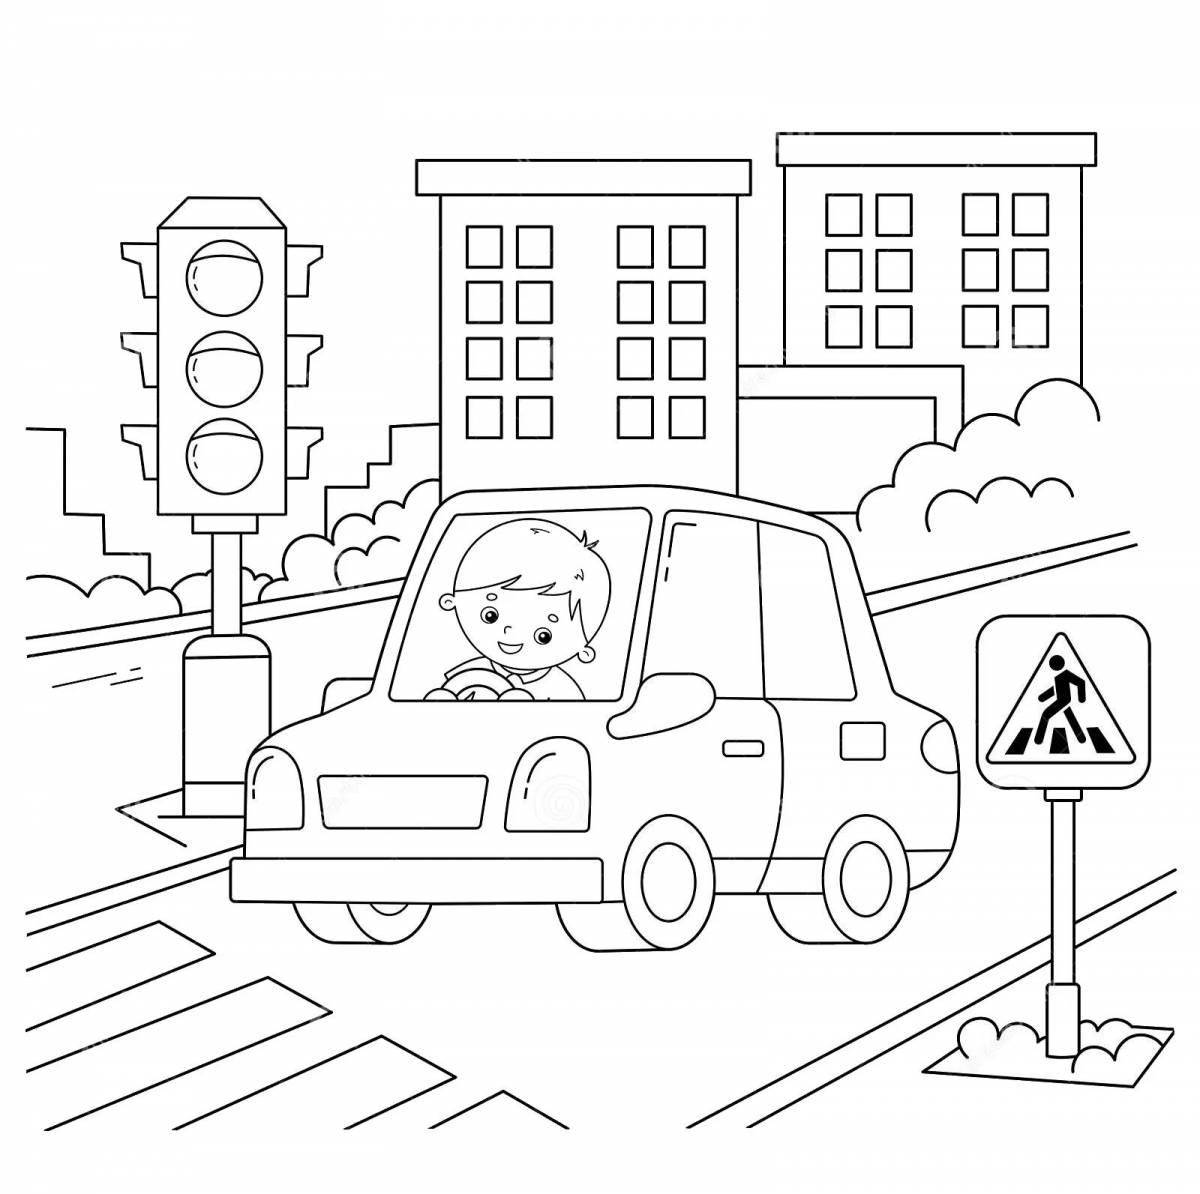 Creative traffic light coloring book for kids